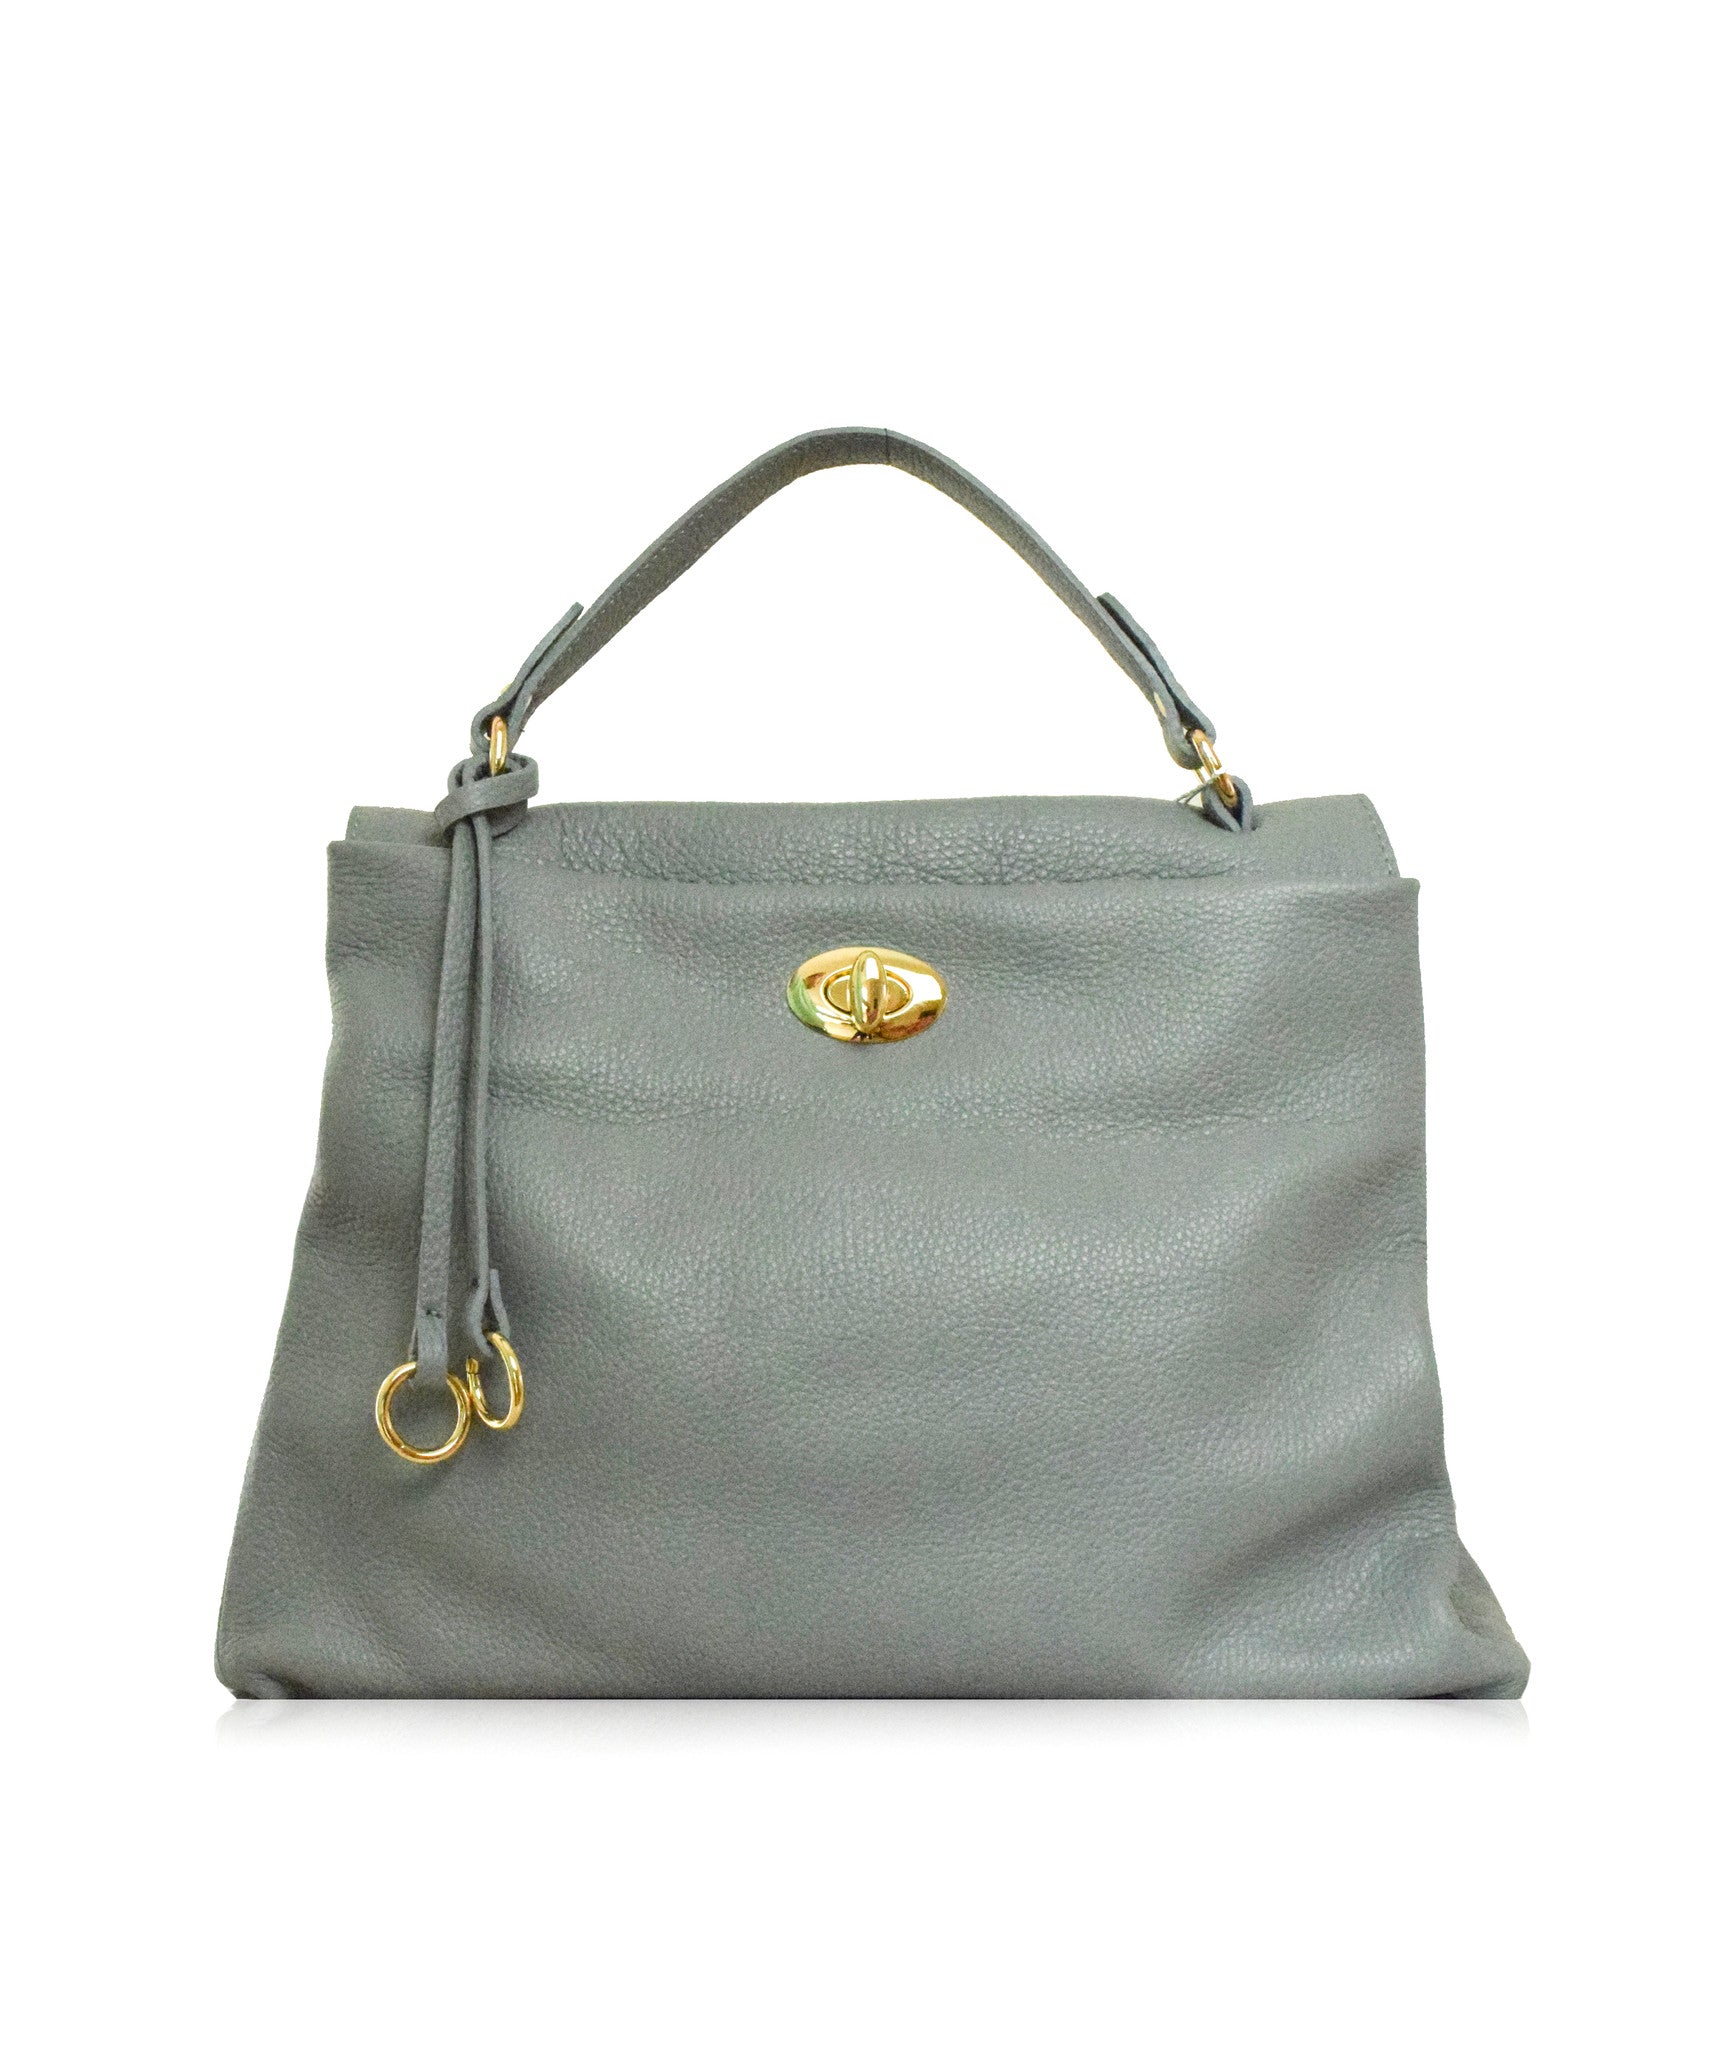 POGGIO Grey Soft Grainy Leather Shoulder Bag| Tote Bag | Florence Leather Collection